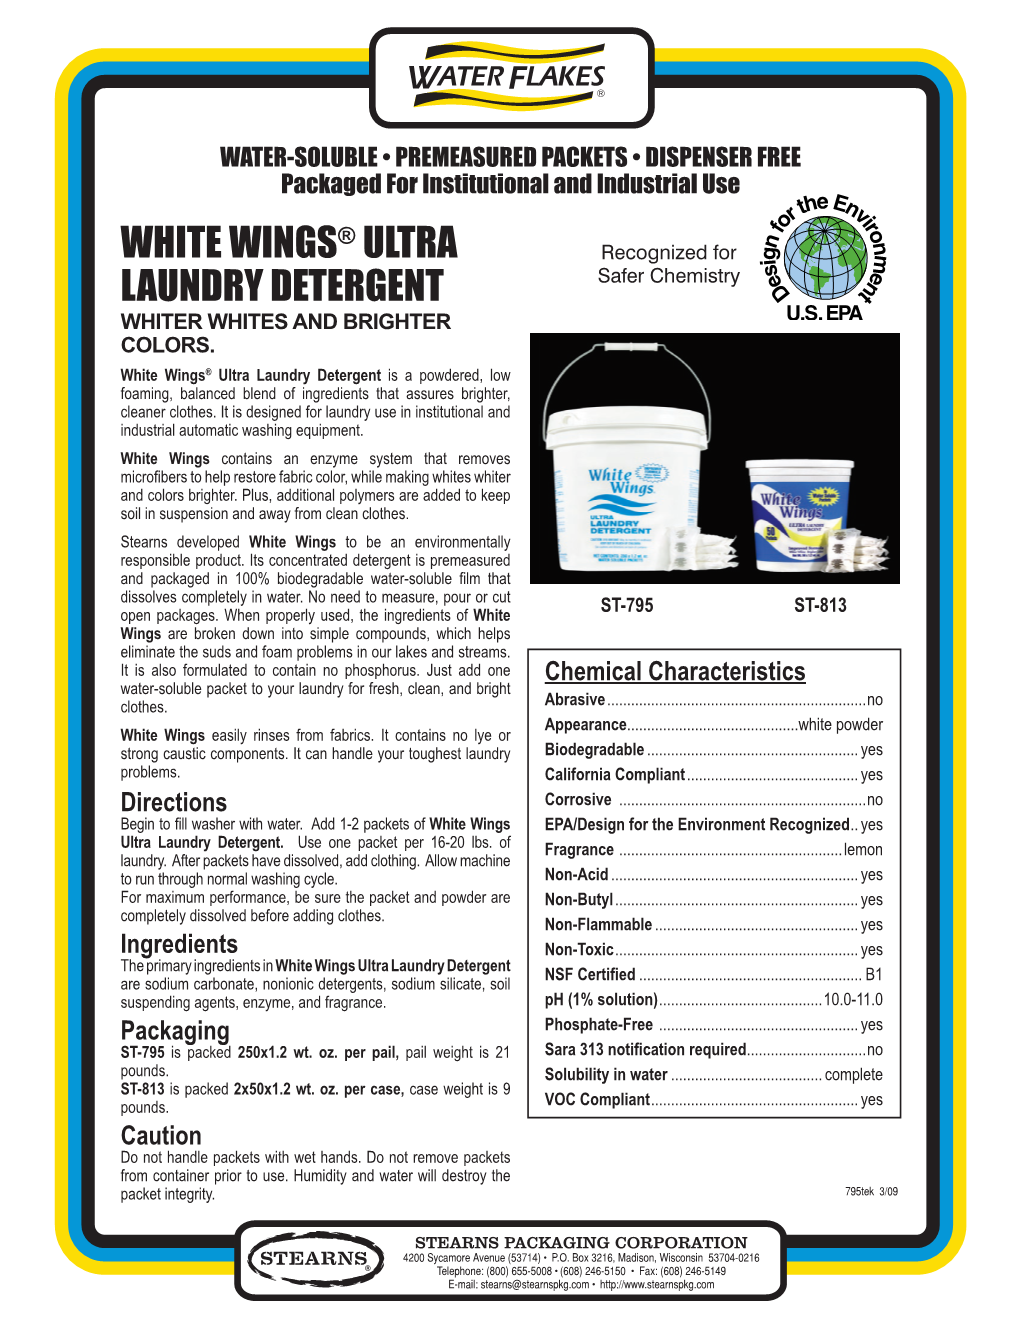 White Wings® Ultra Laundry Detergent Is a Powdered, Low Foaming, Balanced Blend of Ingredients That Assures Brighter, Cleaner Clothes